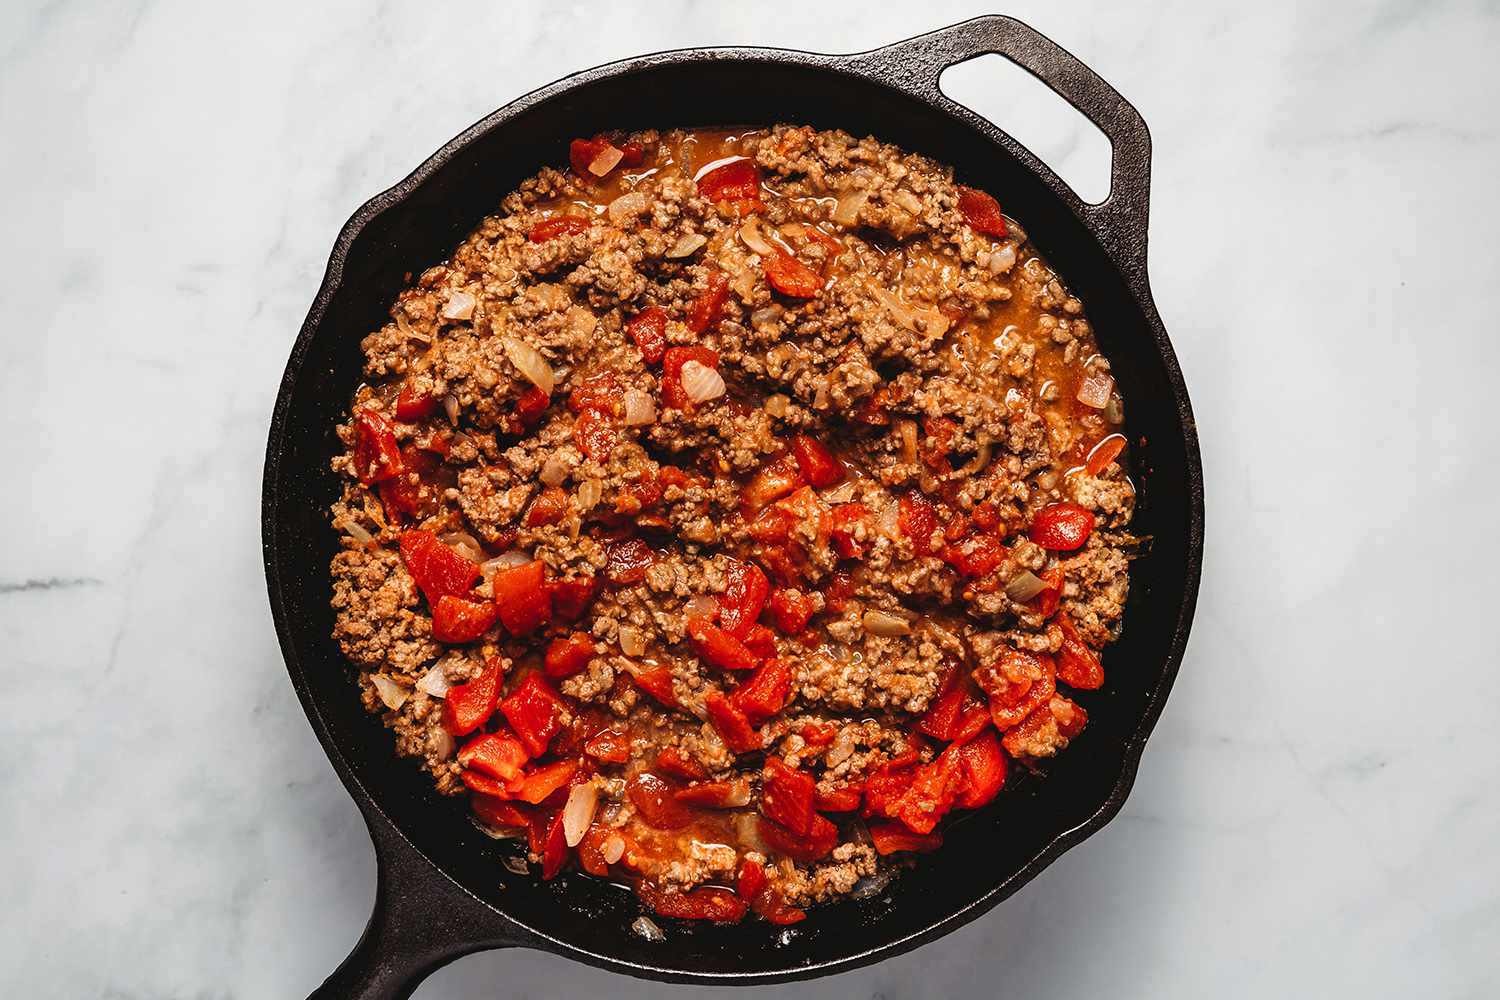 Worcestershire, beef broth, and tomatoes added to the beef mixture in a cast iron skillet 